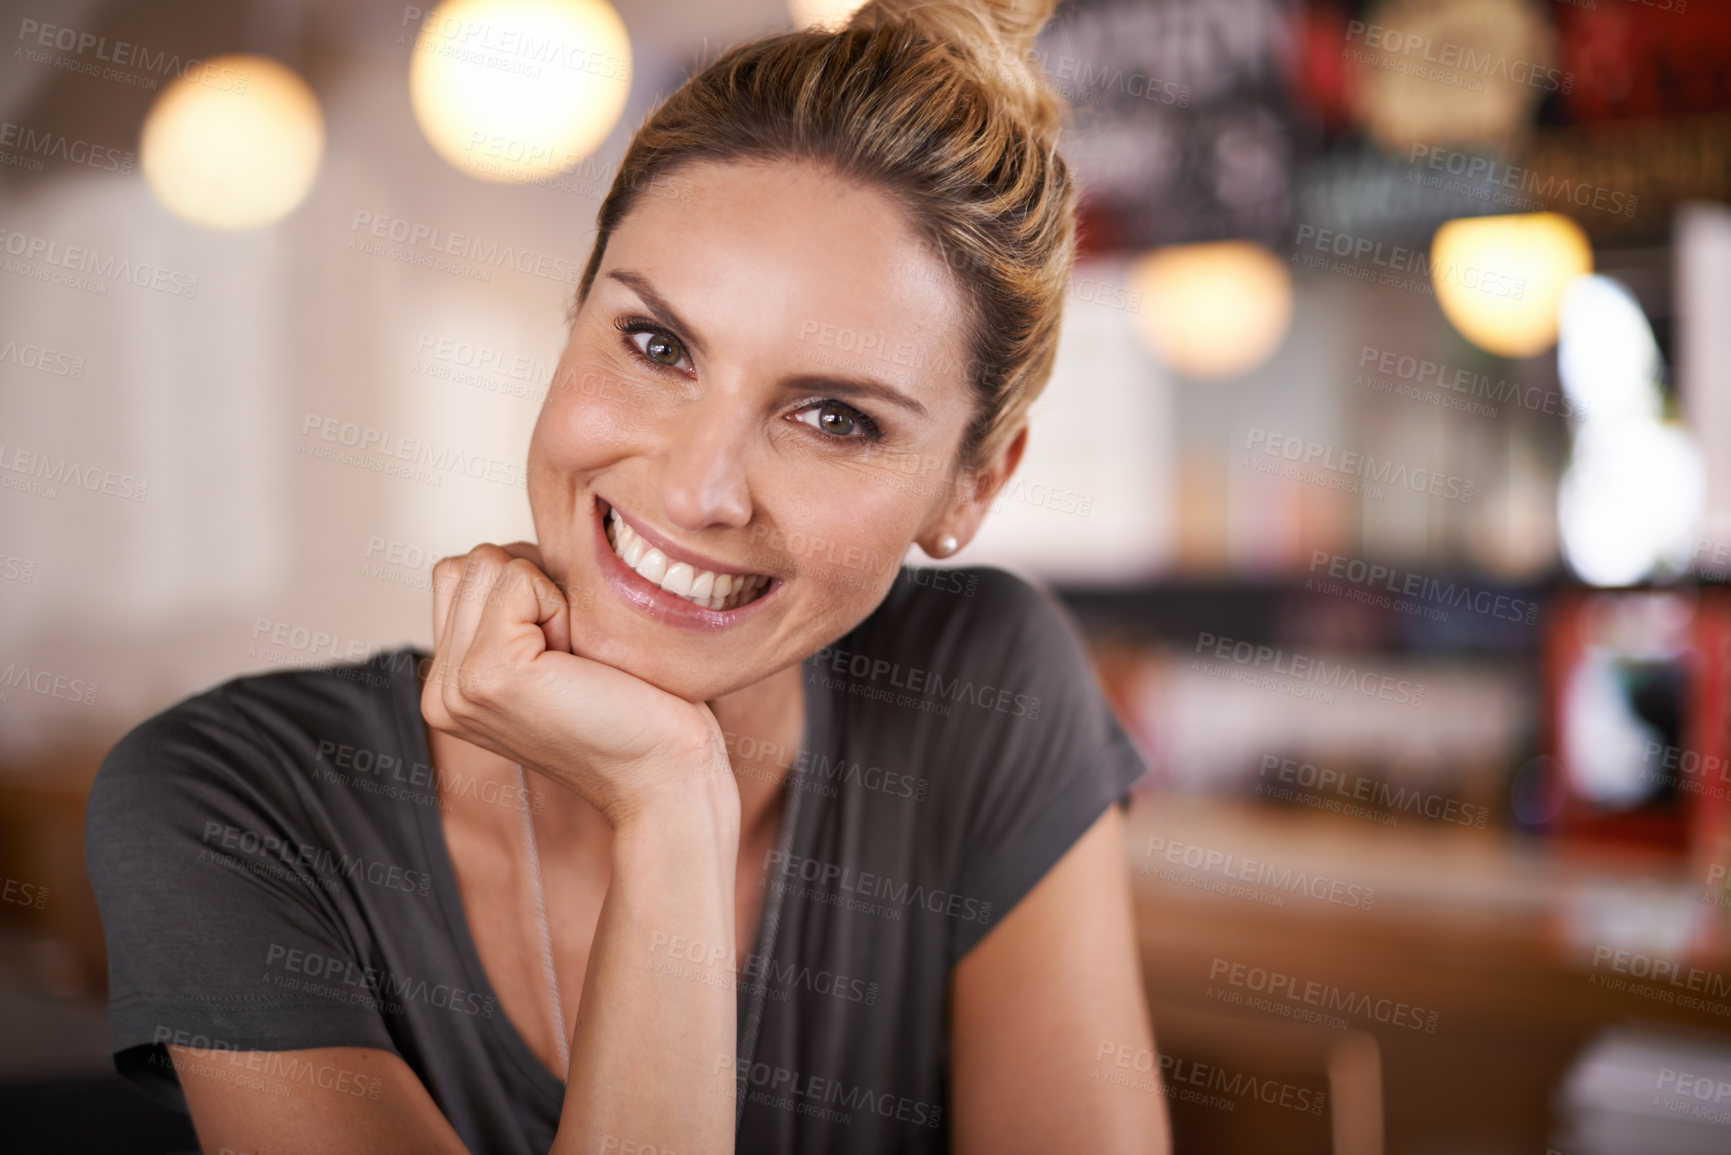 Buy stock photo Happy, portrait and woman relax in coffee shop or restaurant as customer in hospitality on holiday or vacation. Girl, smile and enjoy cafe or small business on weekend, break or morning in cafeteria